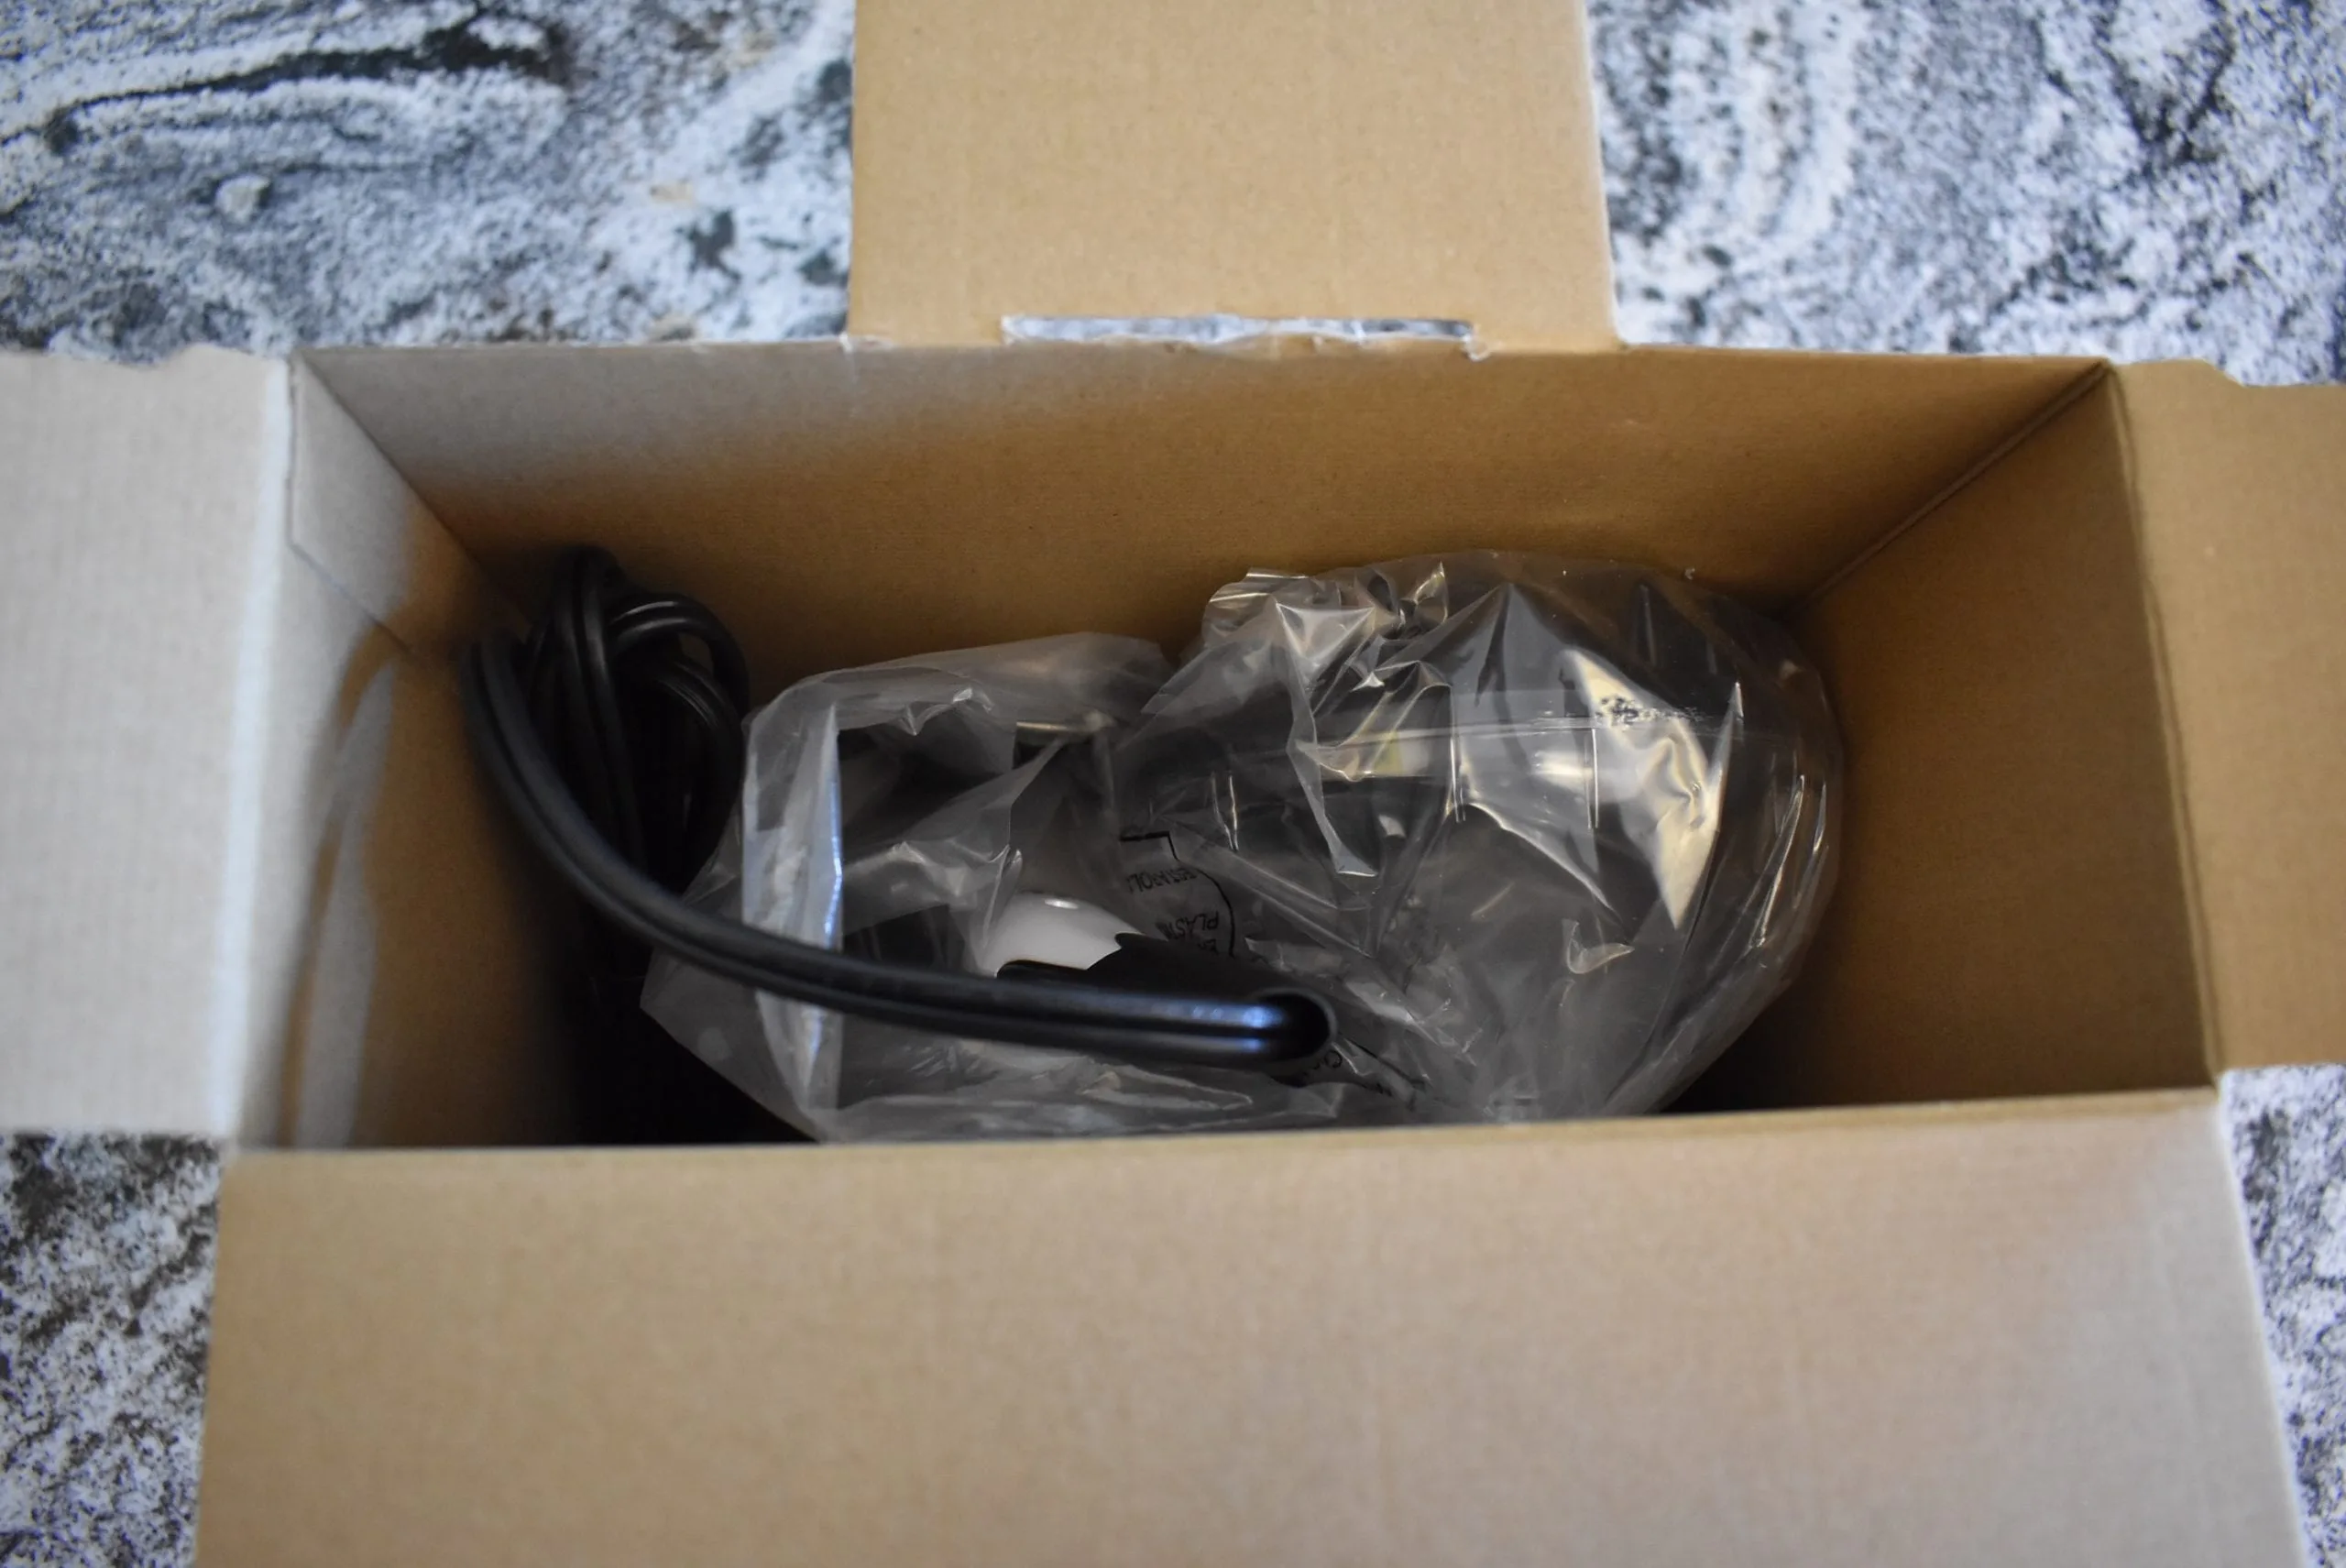 The Revlon 1875 watt hair dryer in its box and wrapped in plastic